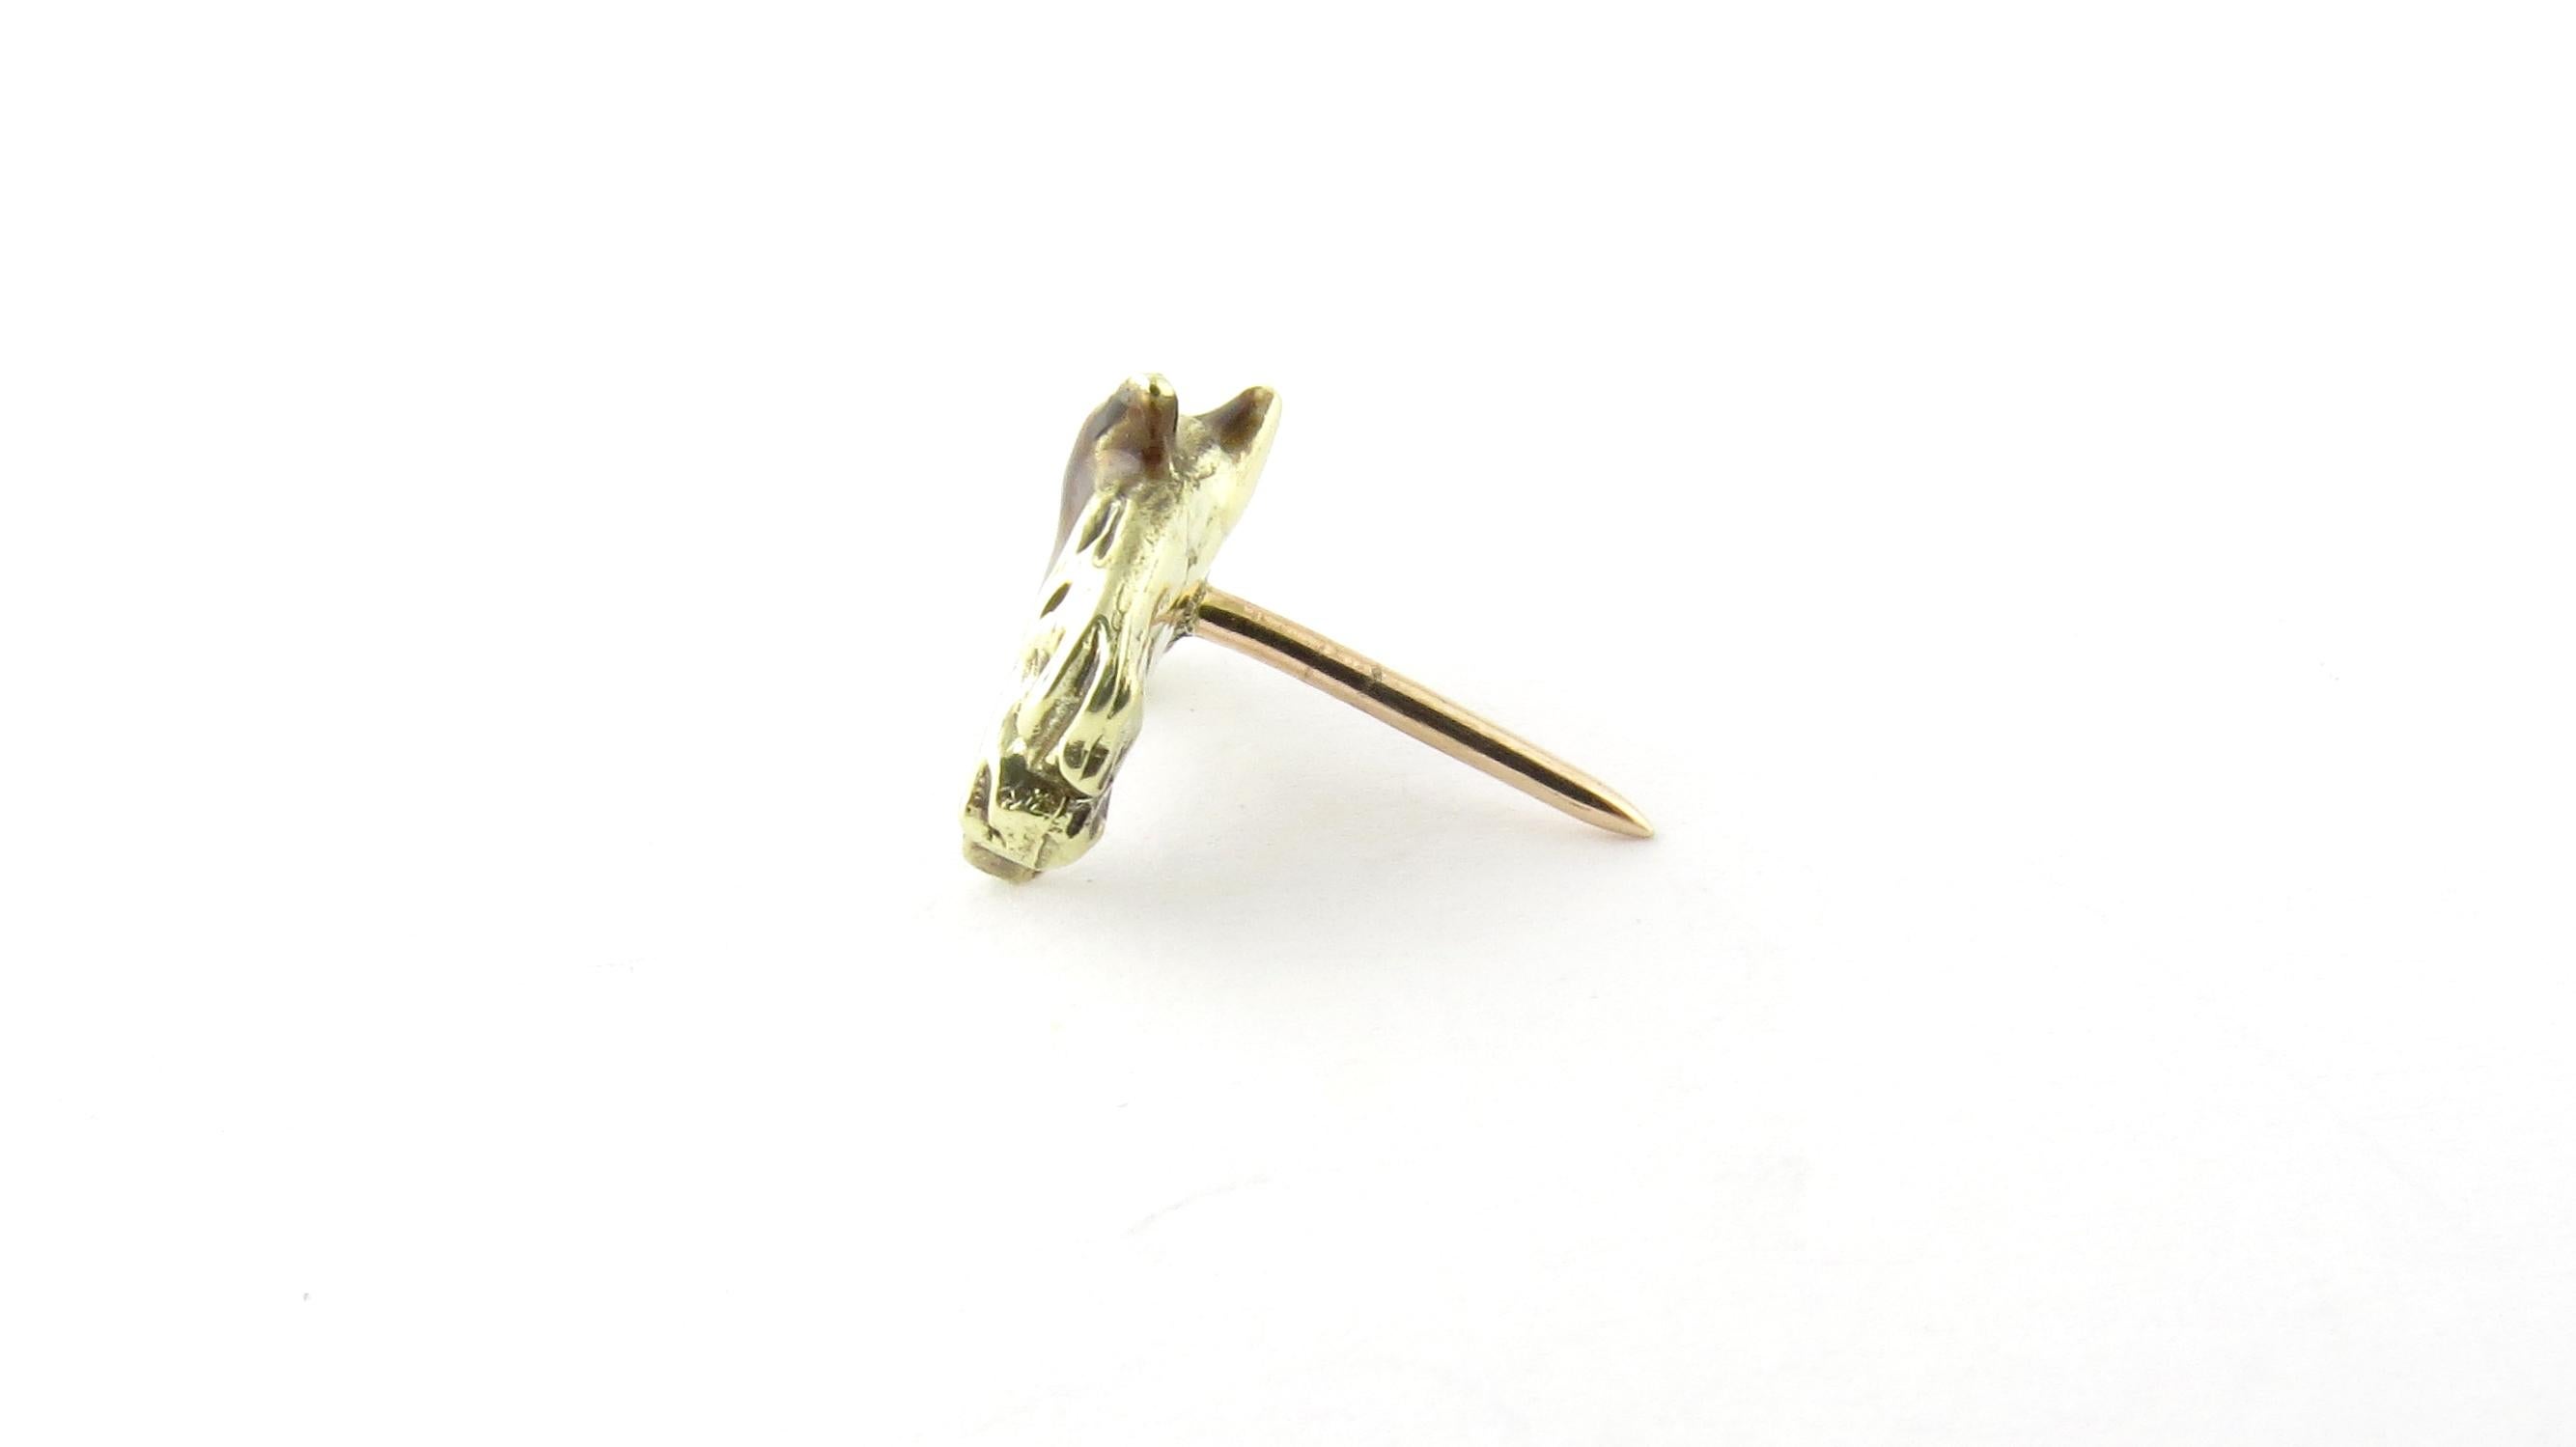 Vintage 14 Karat Yellow Gold and Diamond Horse Head Tie Tack.

This lovely tie tack features a beautifully detailed enamel coated horse head accented with one round single-cut diamond. Crafted in elegant 14K yellow gold.

Approximate total diamond